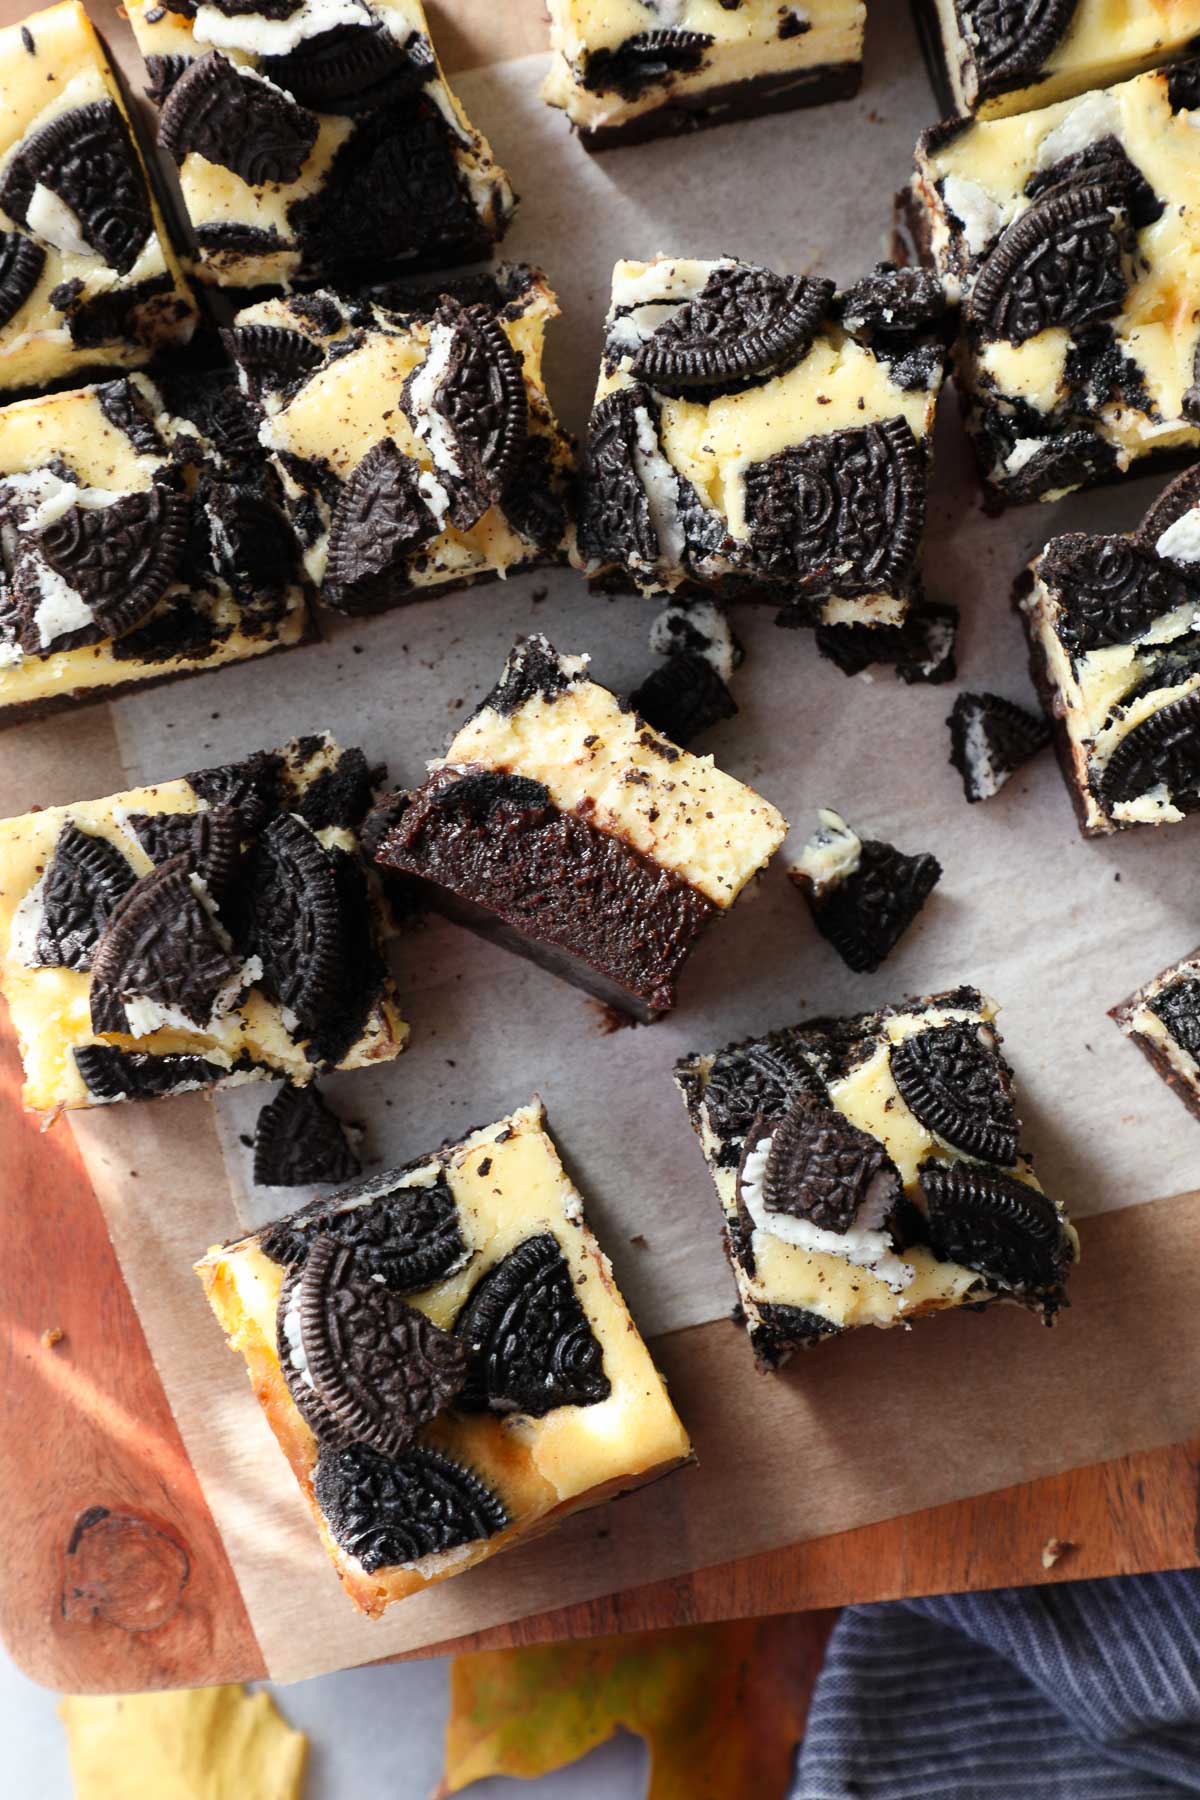 Oreo cheesecake brownies cut into squares on a wooden serving board.